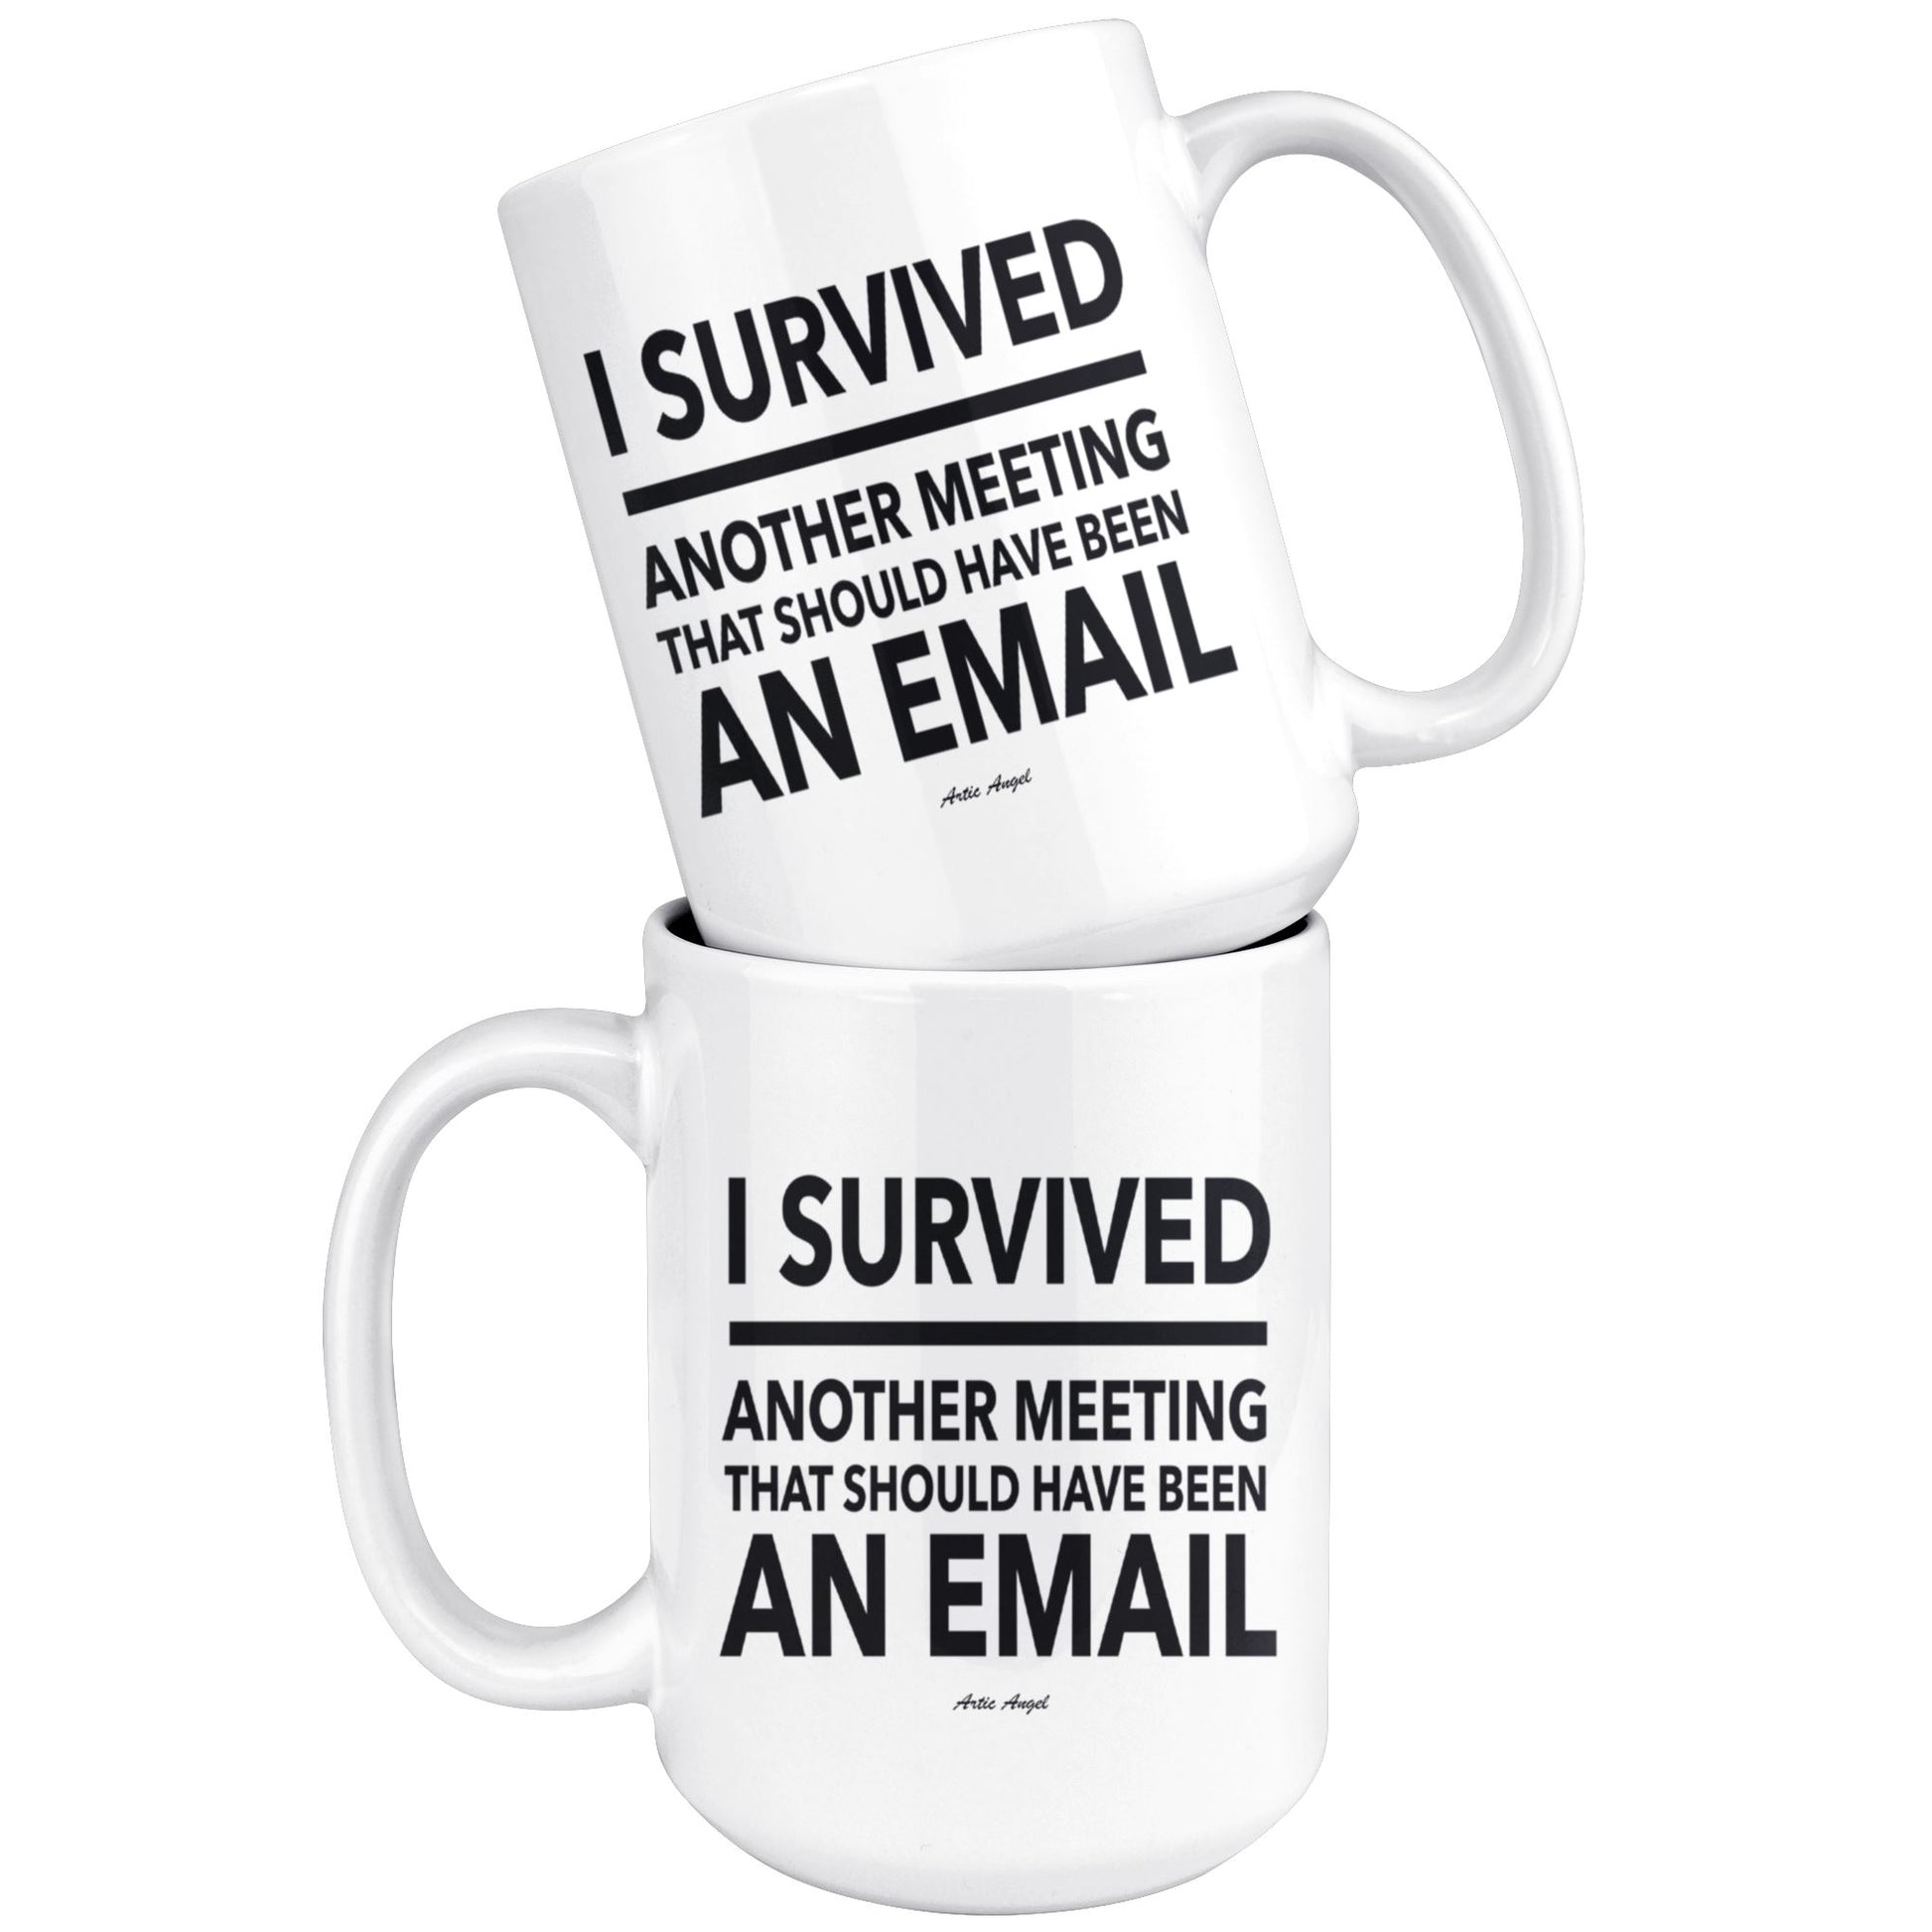 "I Survived Another Meeting That Should Have Been An Email" - Coffee Mug Drinkware 